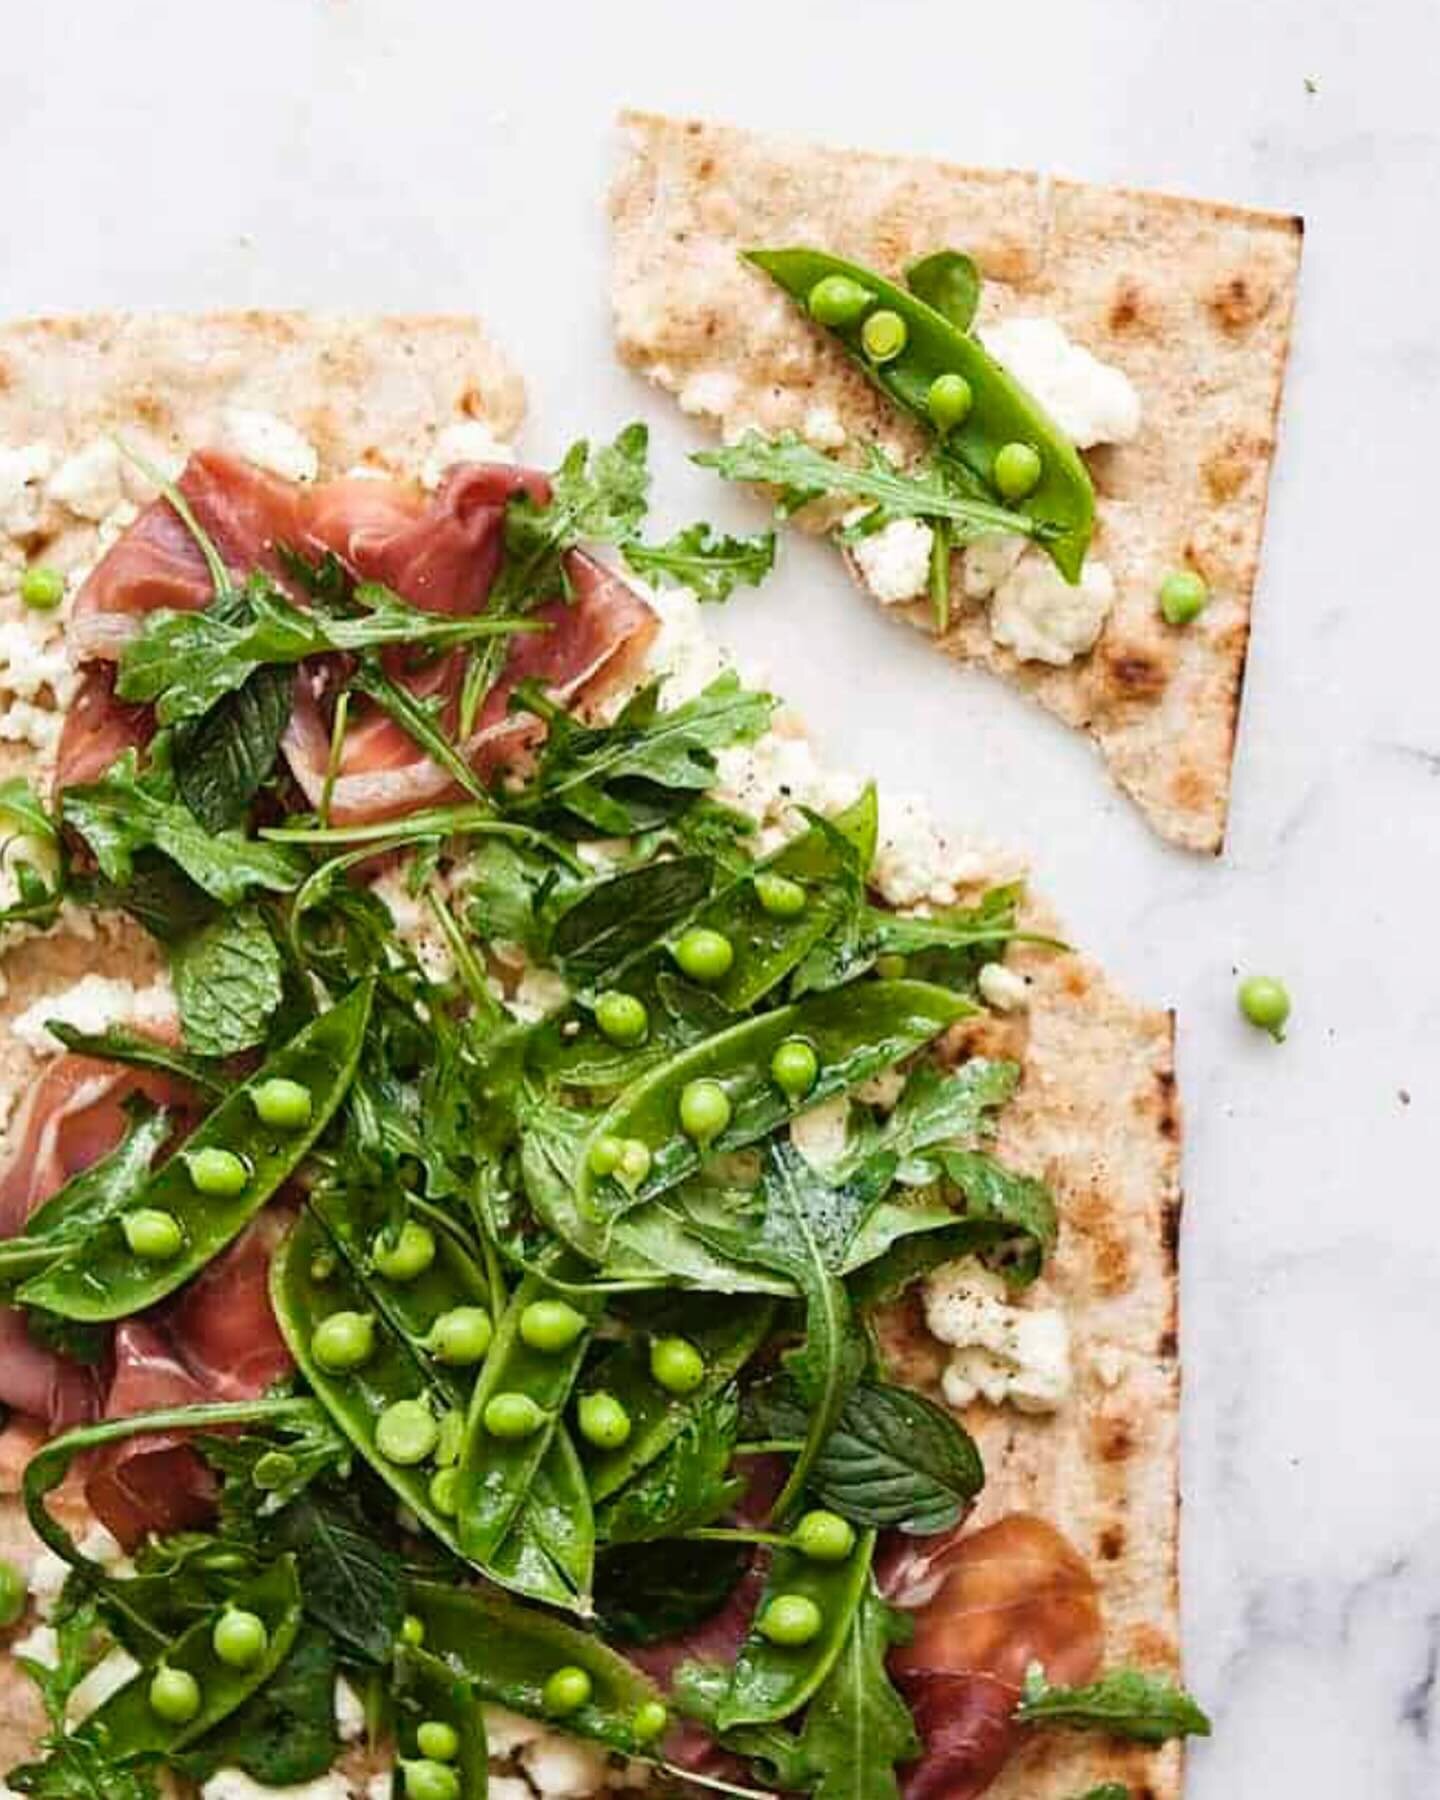 BEAUTIFUL FOOD BY DESIGN |  Flatbread with Ricotta, Prosciutto &amp; Snap Peas. Perhaps this irresistible combination of crispy flatbread topped prosciutto with crispy spring snap peas and herbs &ndash; a quick fix for a racing hunger.
TAP BIO FOR RE